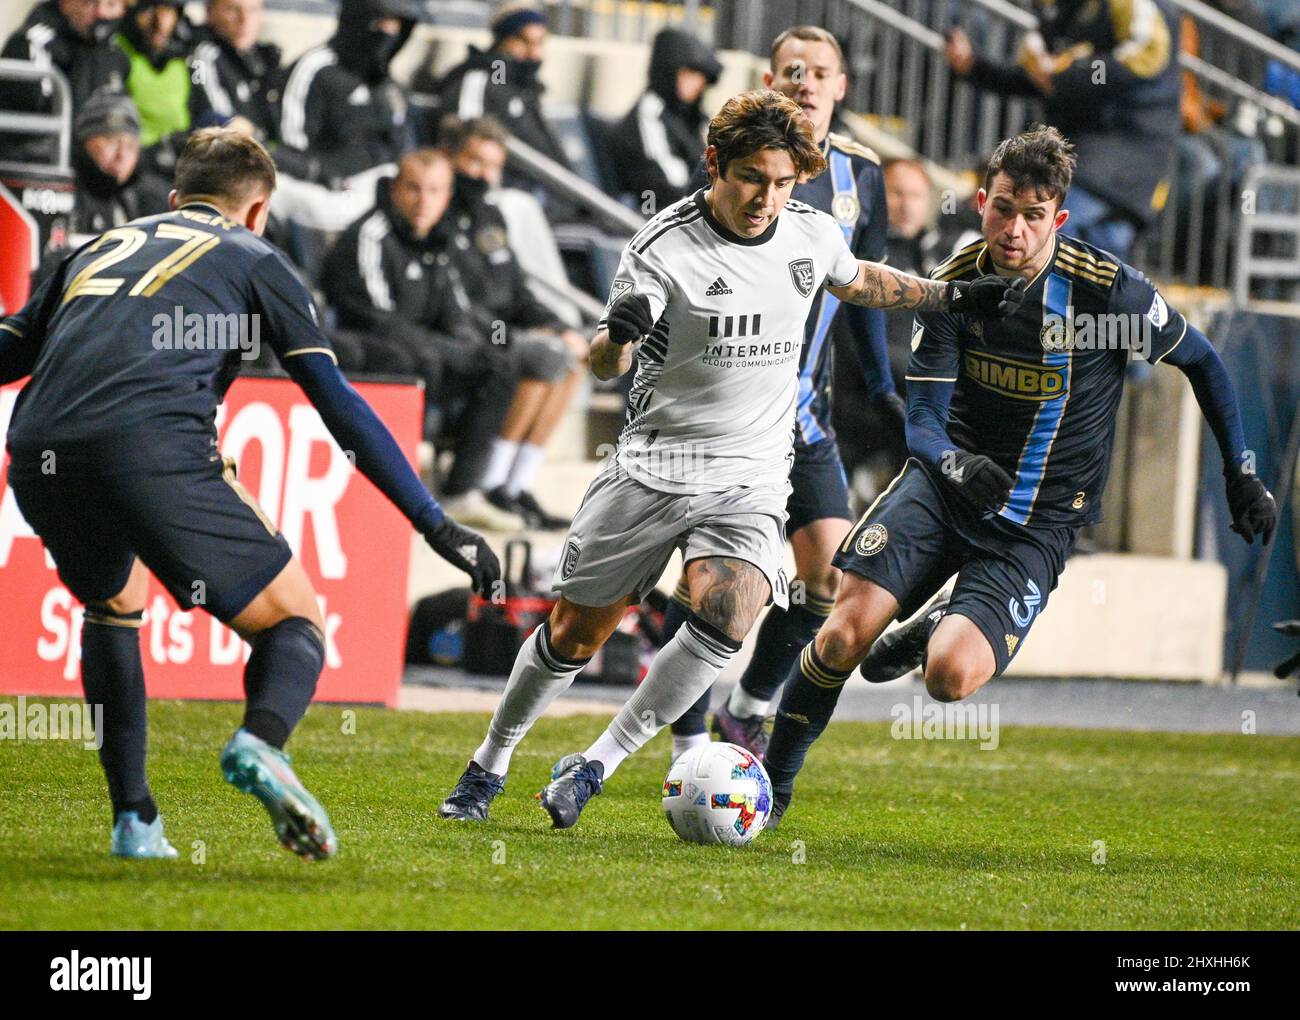 Chester, Pennsylvania, USA. 12th Mar, 2022. March 12, 2022, Chester PA- Philadelphia Union player, KAI WAGNER (27) and LEON FLACH (31) fight for the ball with JAVIER LOPEZ (9) of the San Jose Earthquakes during the match at Subaru Park (Credit Image: © Ricky Fitchett/ZUMA Press Wire) Stock Photo